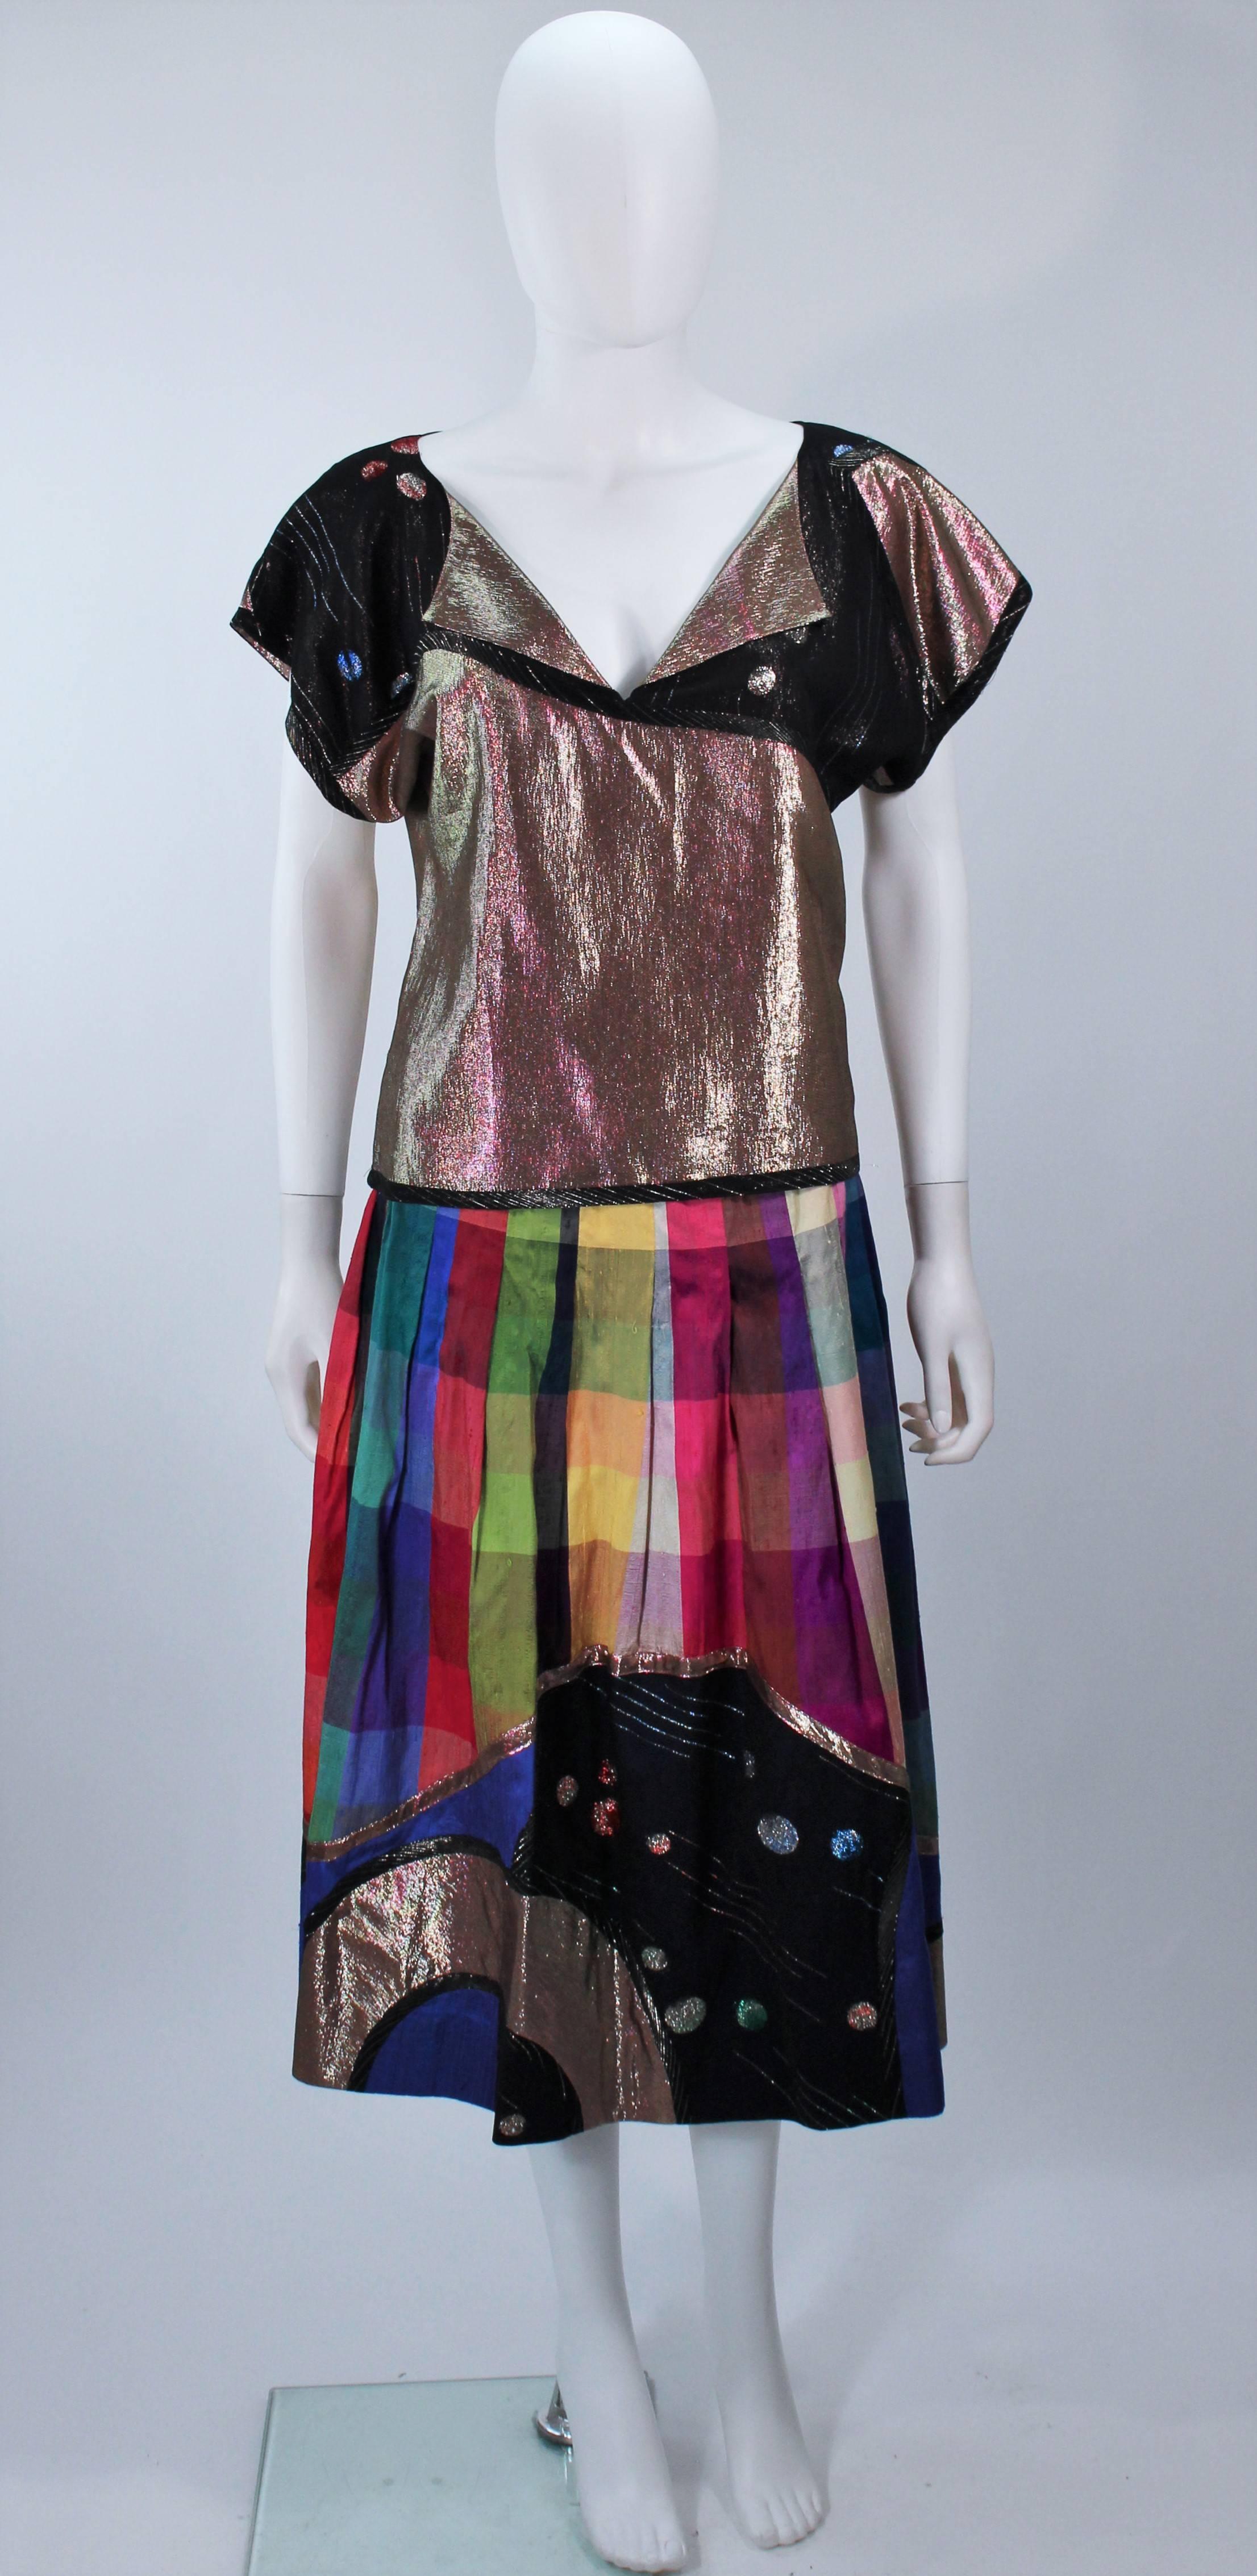  This Koos skirt suit set is composed of silk in metallic hues as well as vibrant plaid print. The blouse and skirt are both pullover style. The skirt features a pleated design. In excellent vintage condition. 

  **Please cross-reference